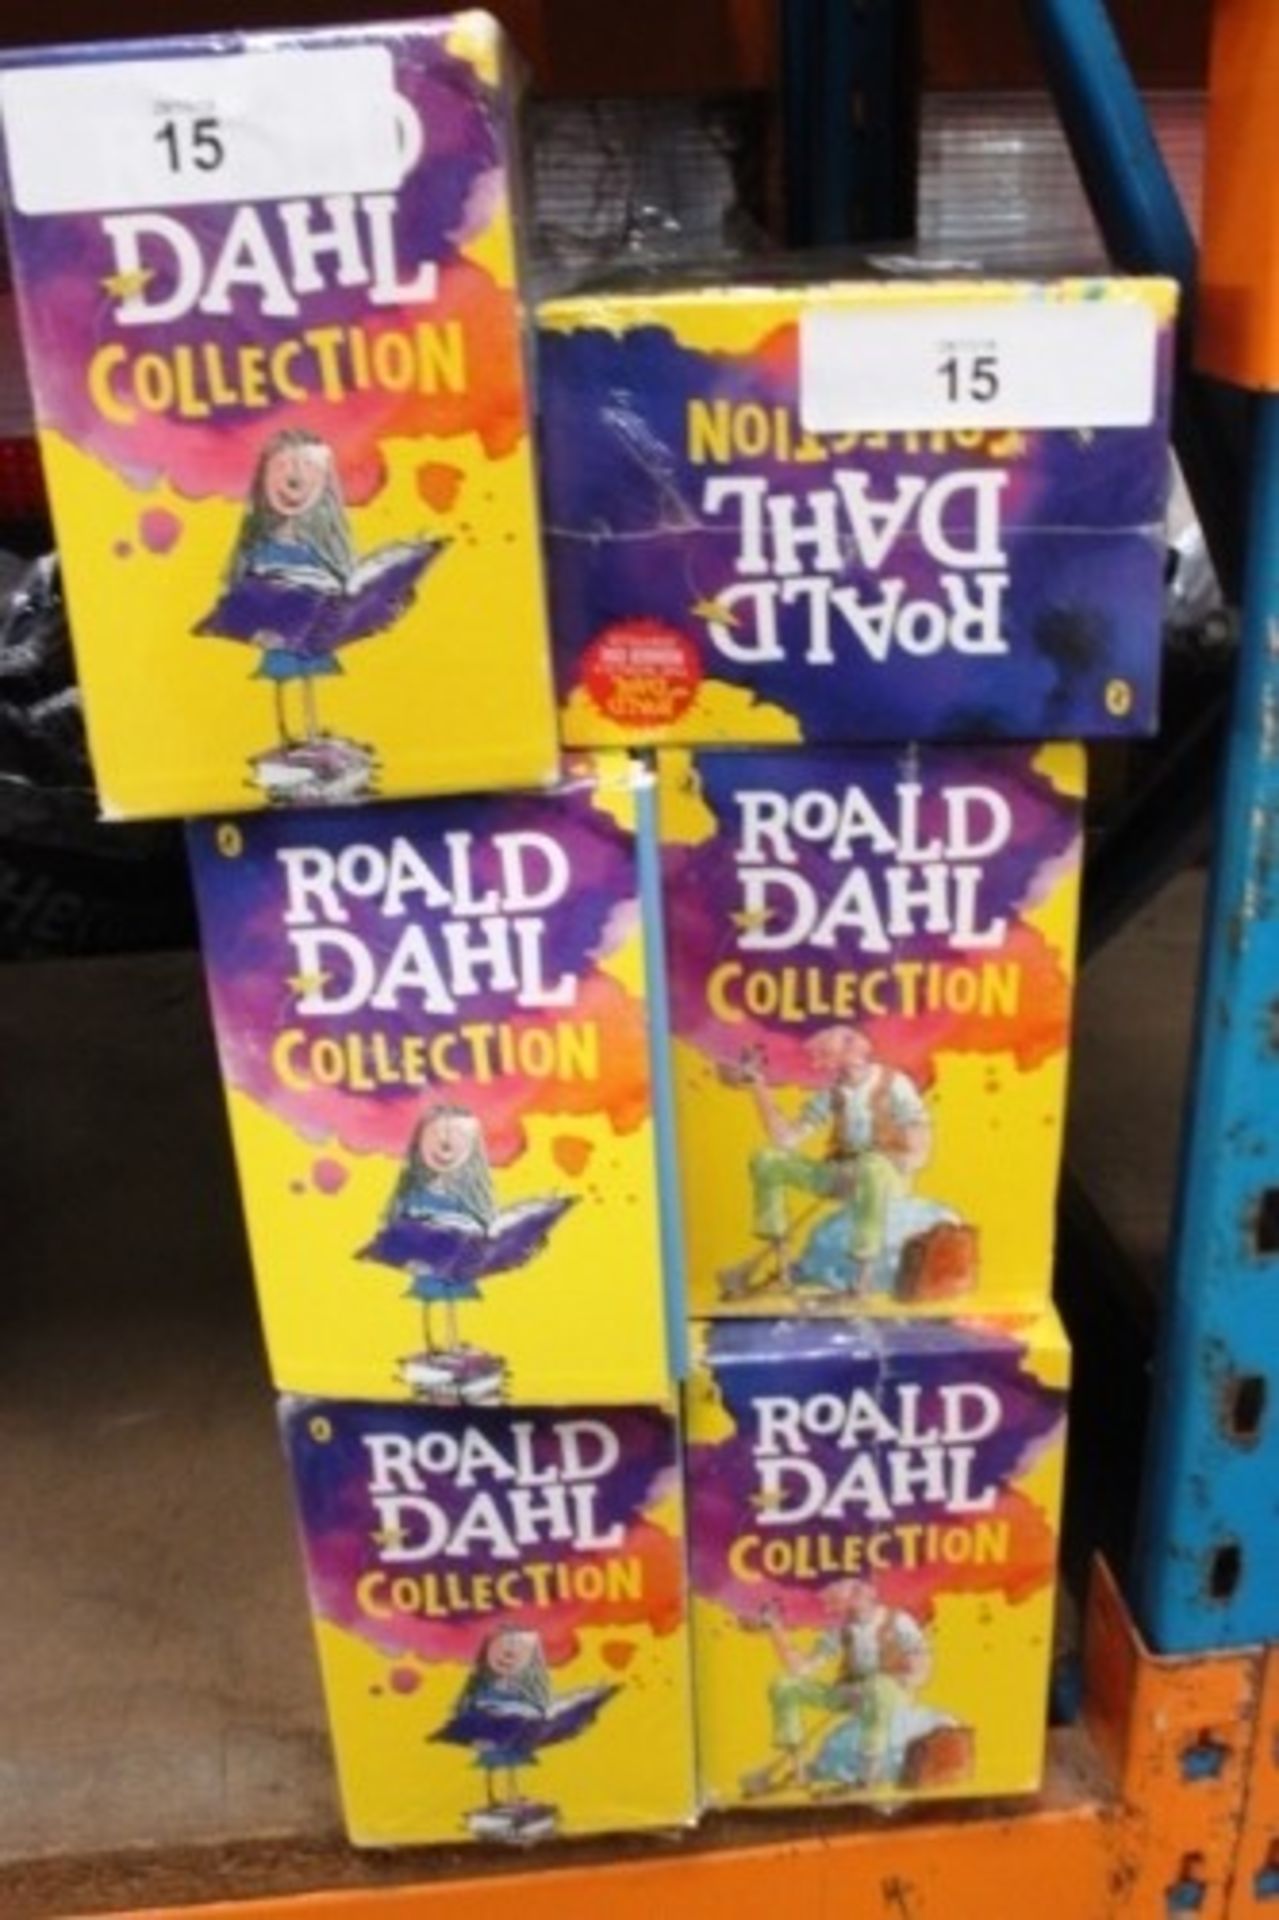 6 x Roald Dahl collection box sets, comprising of 4 x sealed, 2 x open - Second hand (25)